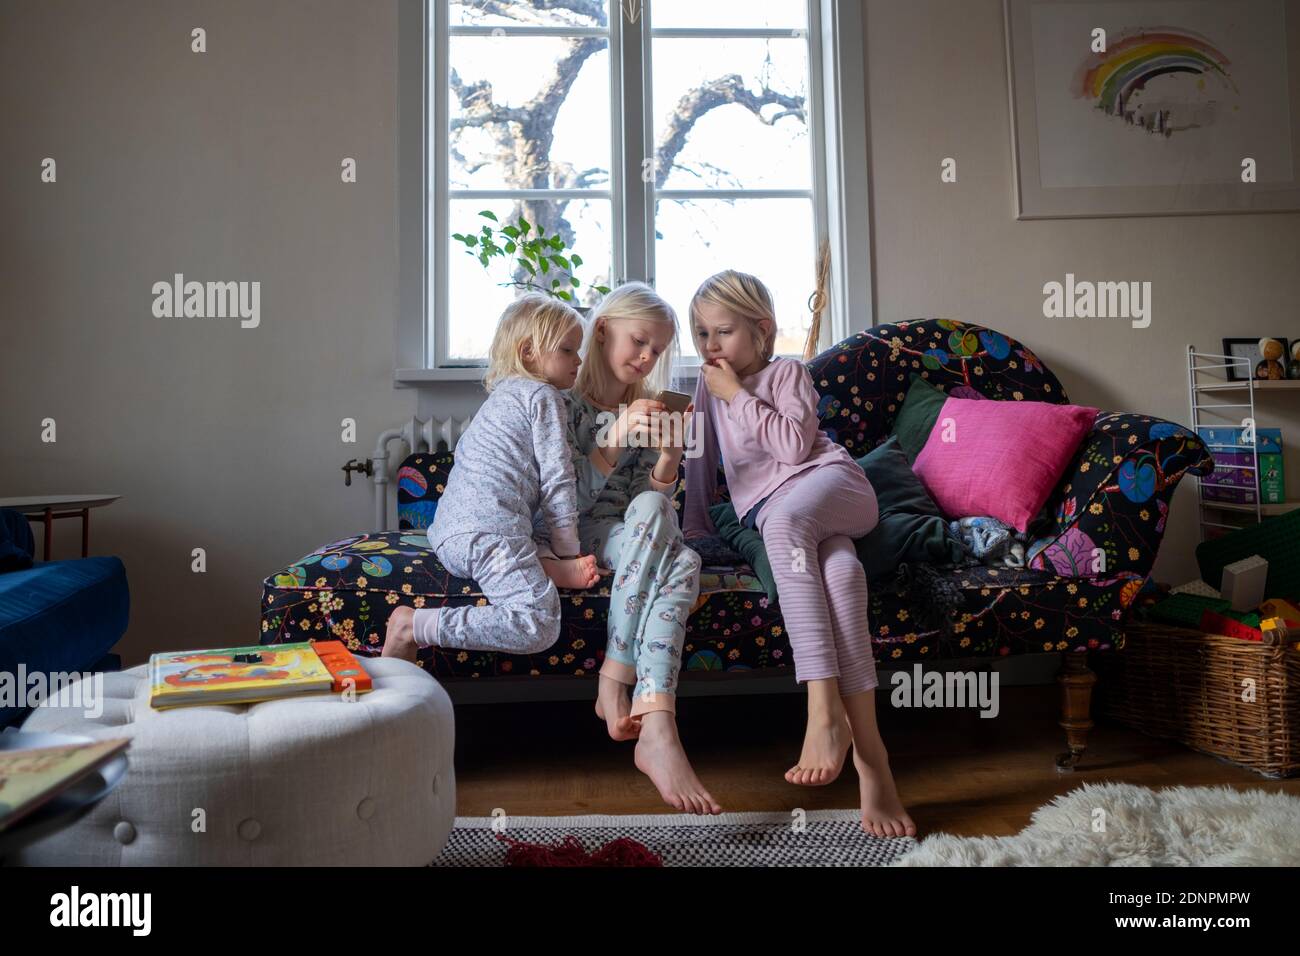 Sisters sitting on sofa Banque D'Images